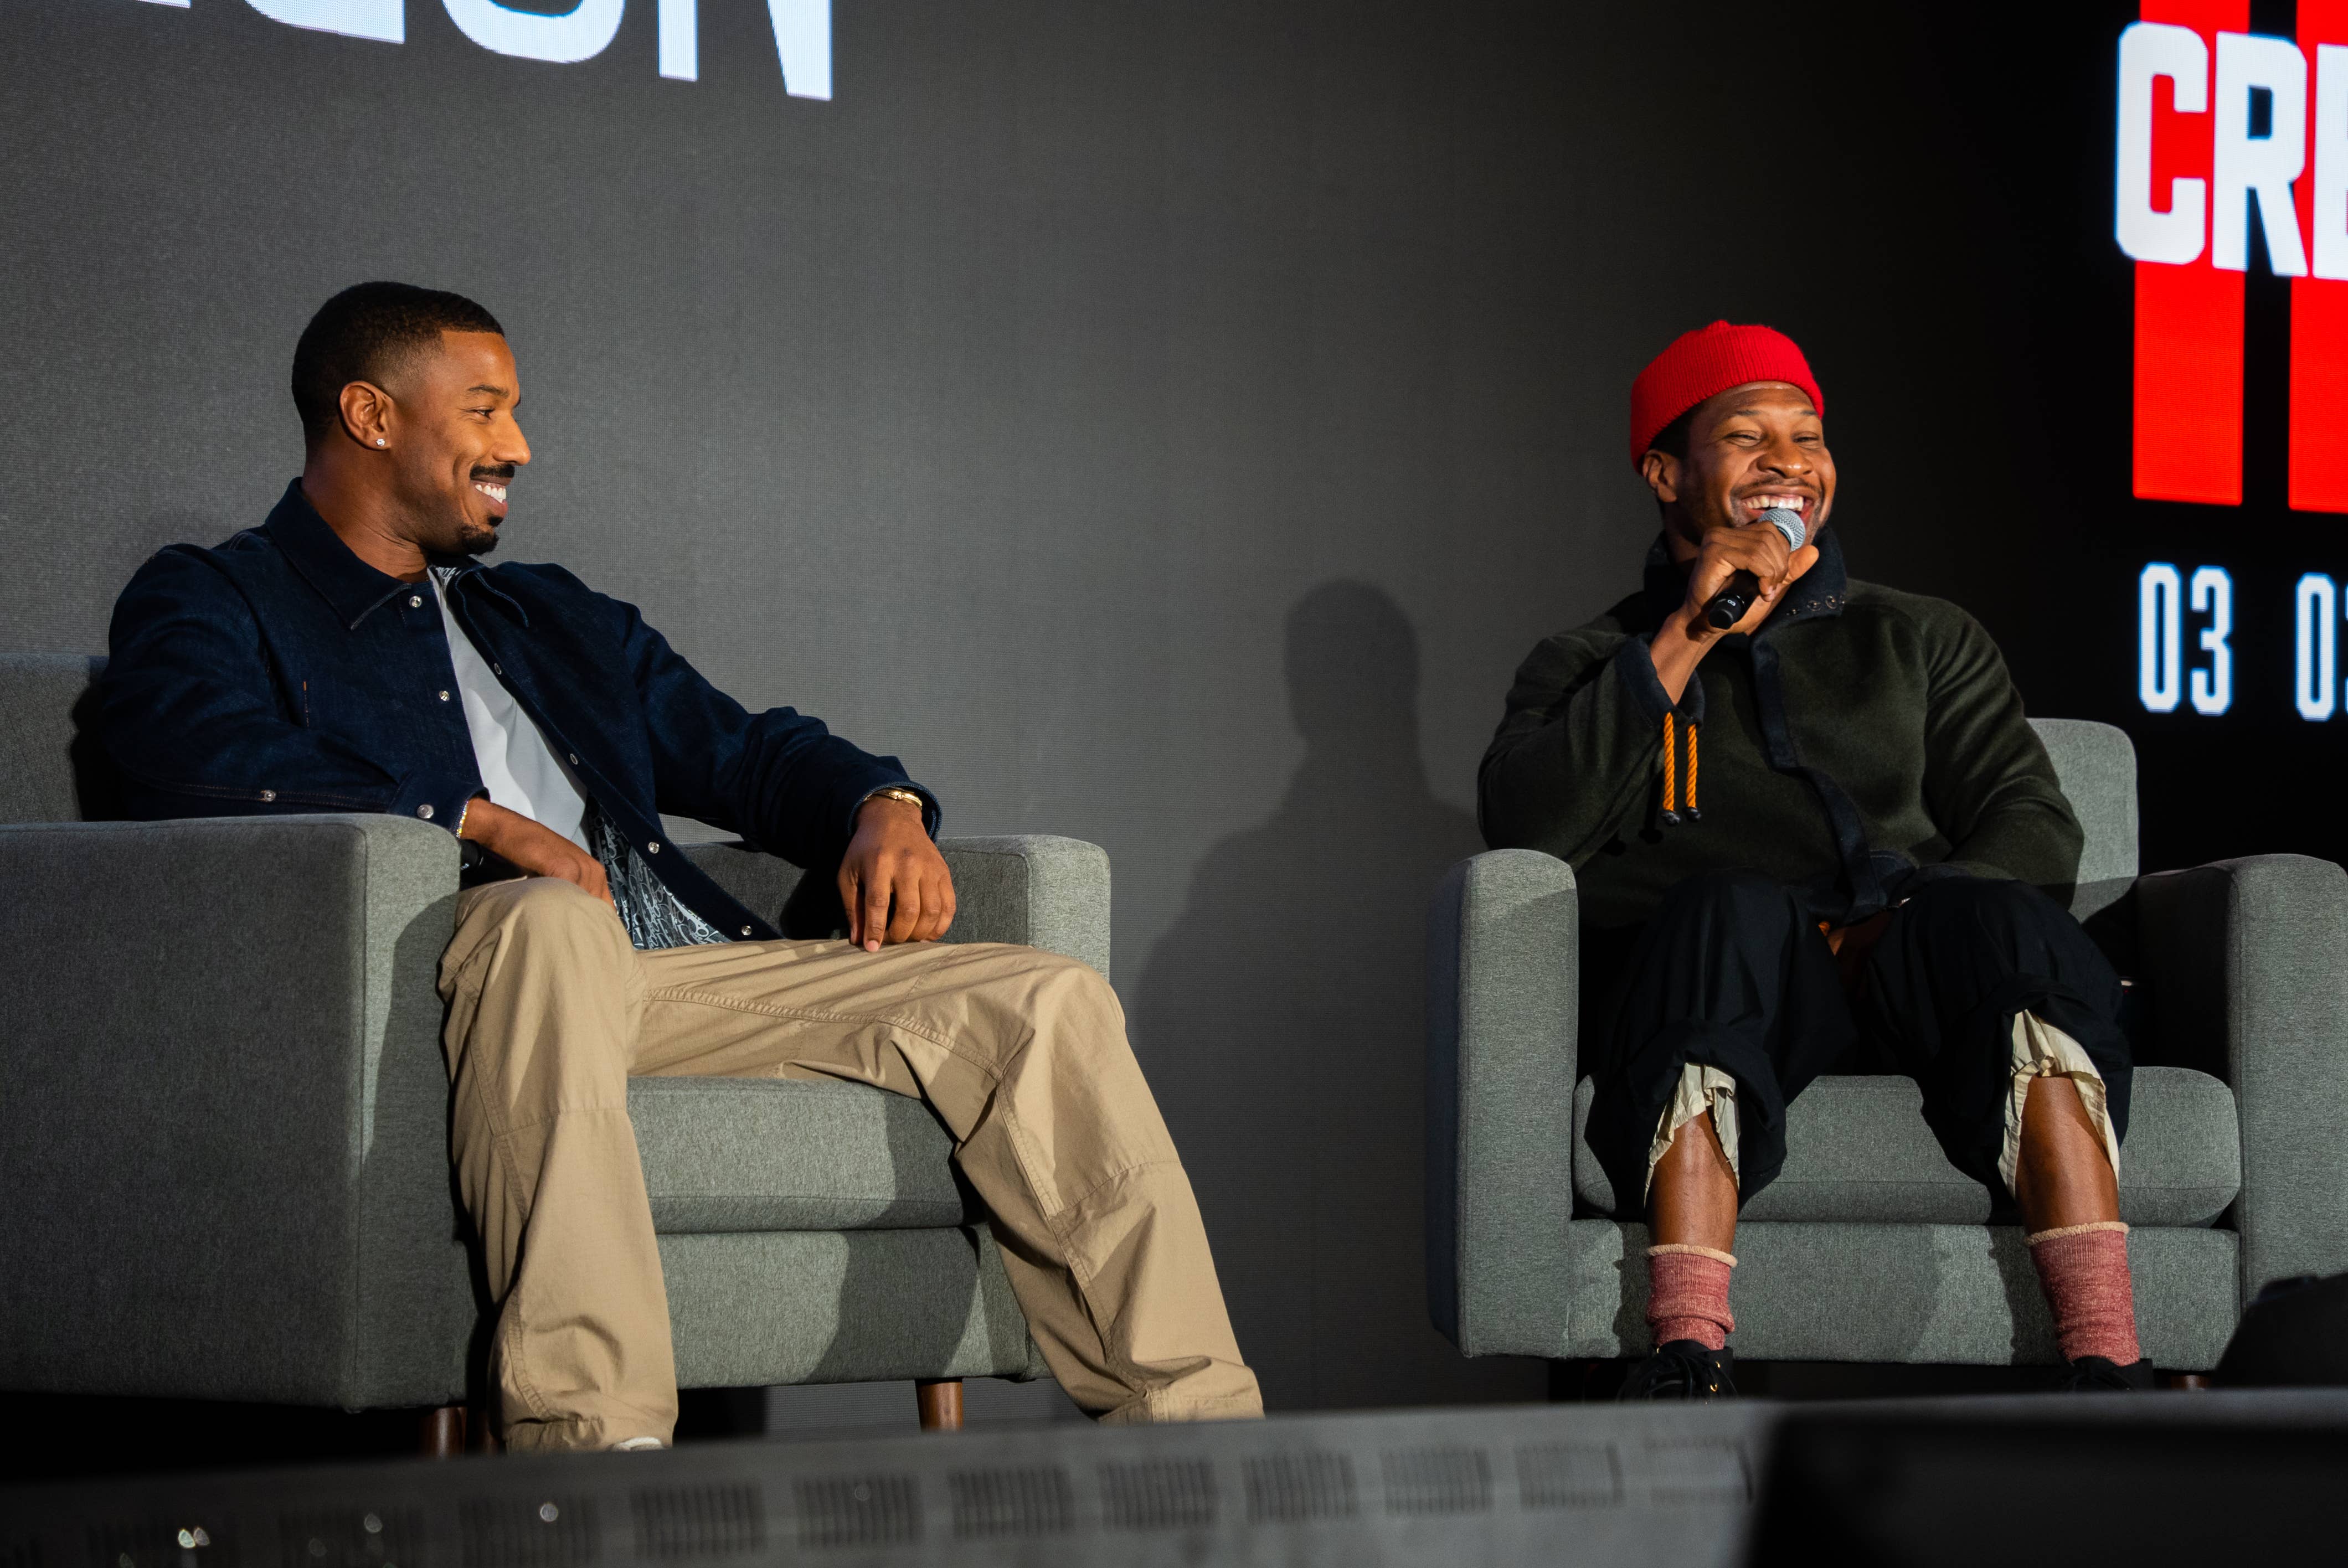 Creed 3 workout: Michael B Jordan and Jonathan Majors reveal their fitness  routines